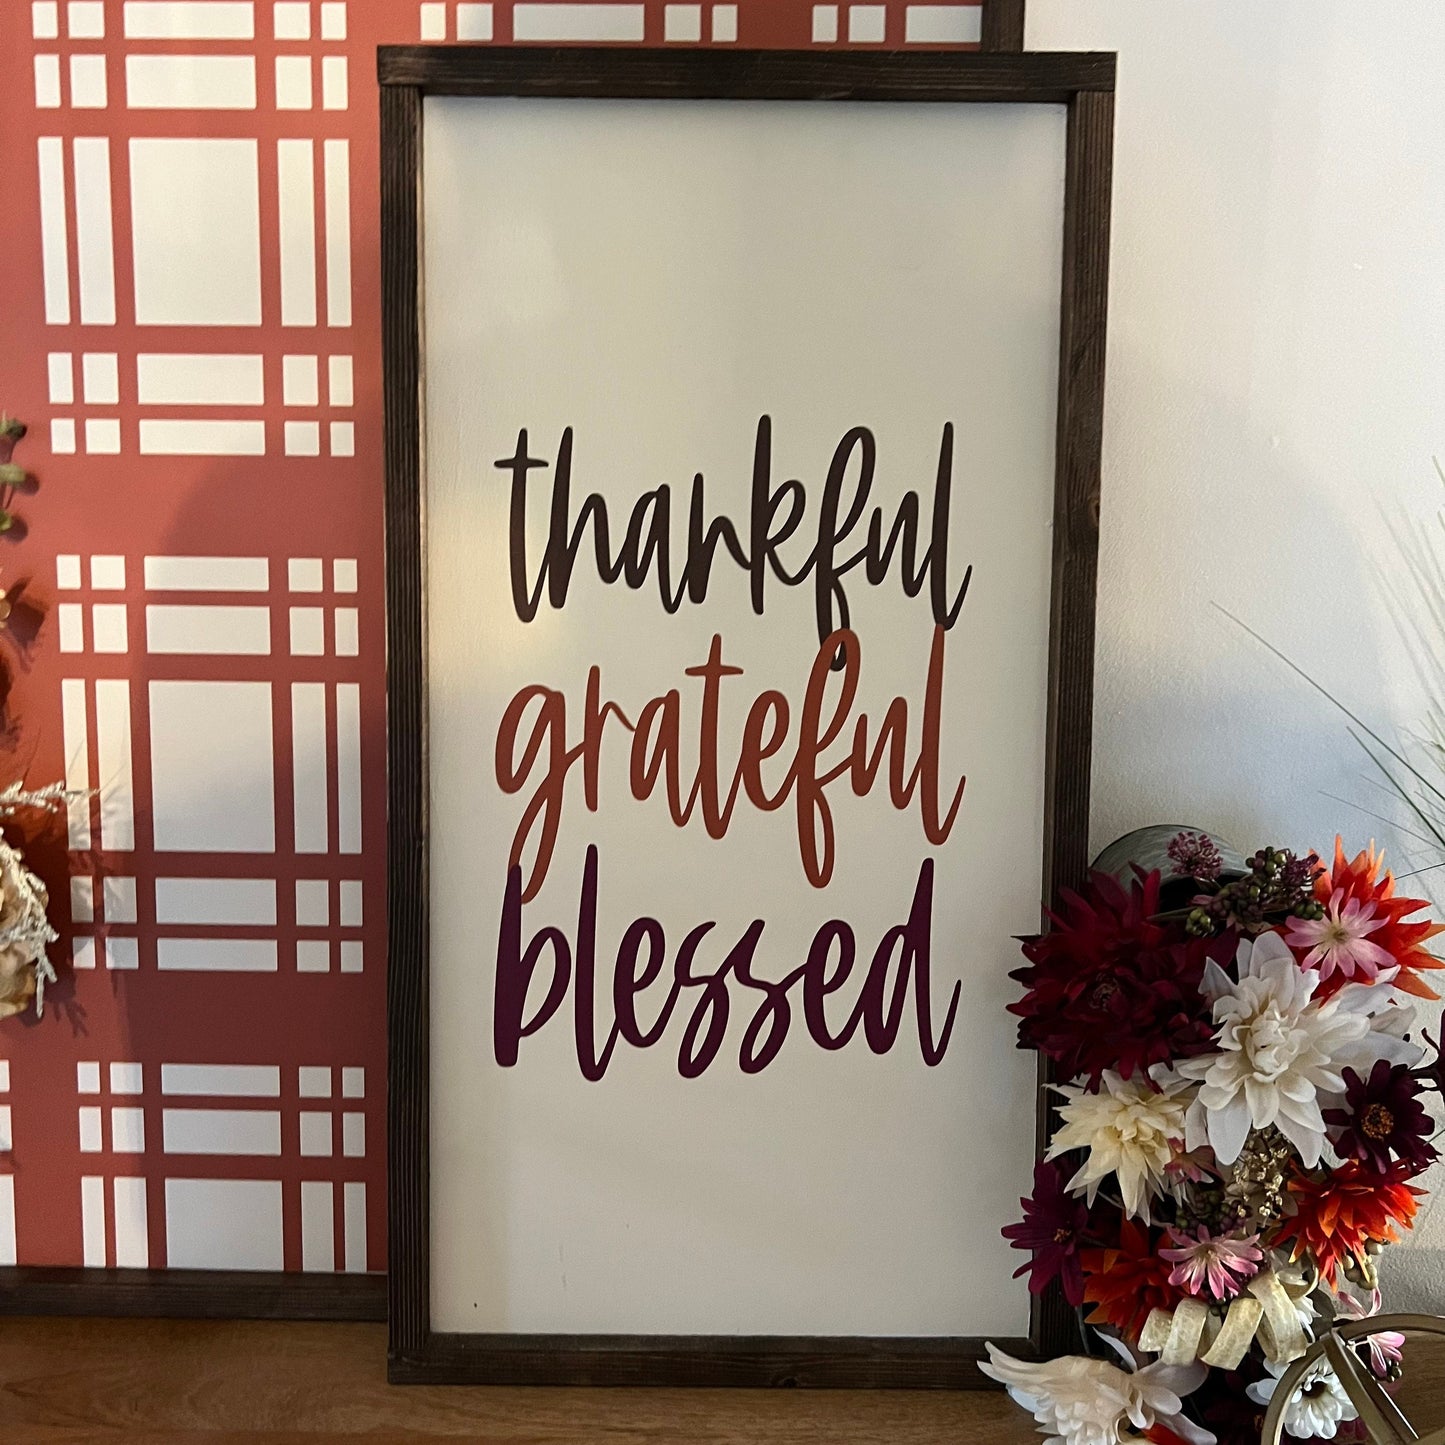 Autumn Bundles! Decorative background with thankful grateful blessed wood signs [FREE SHIPPING]